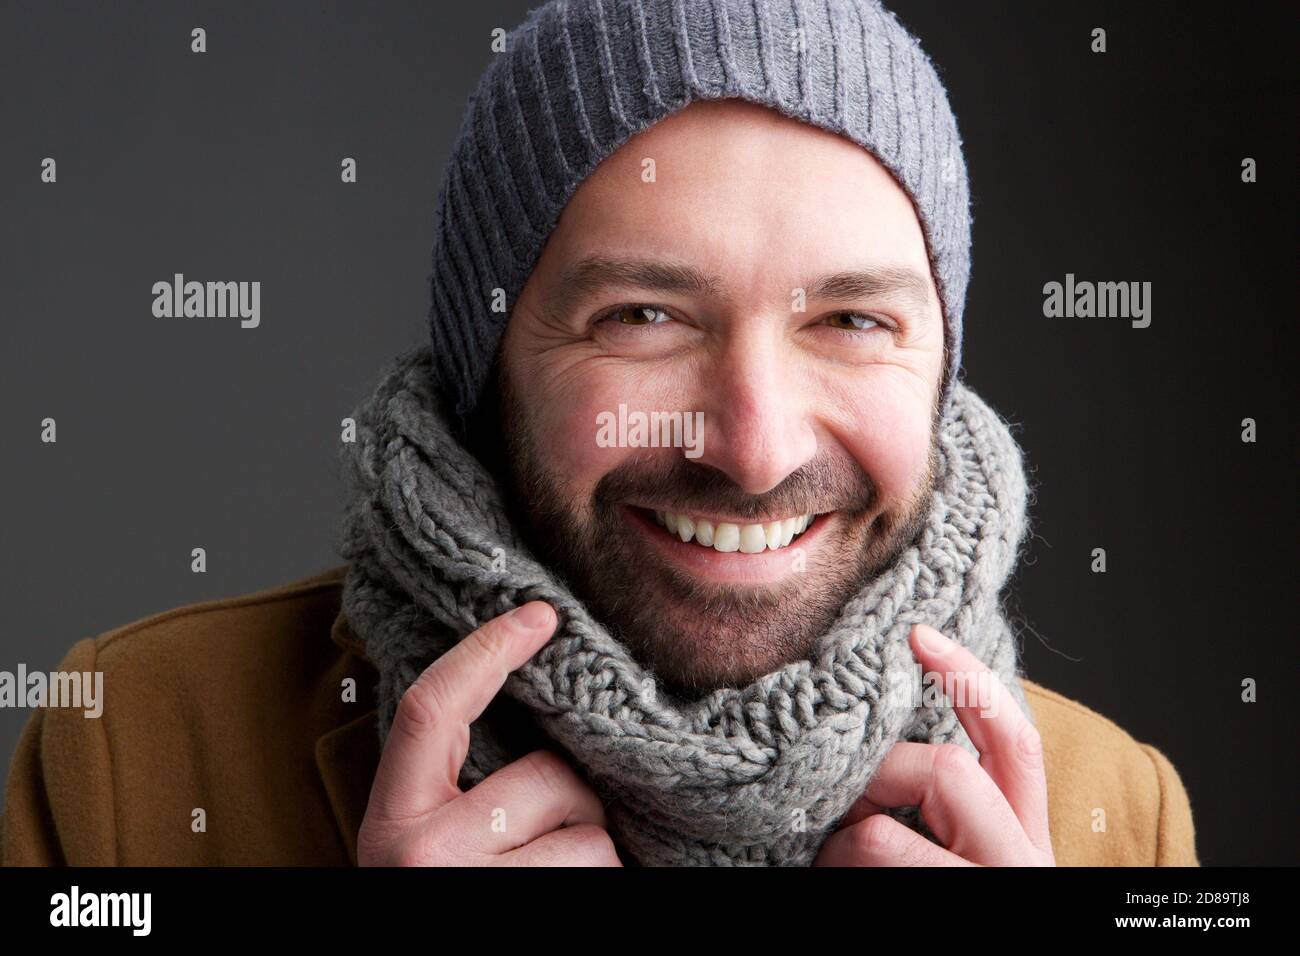 Portrait of middle age man with hat and scarf Stock Photo